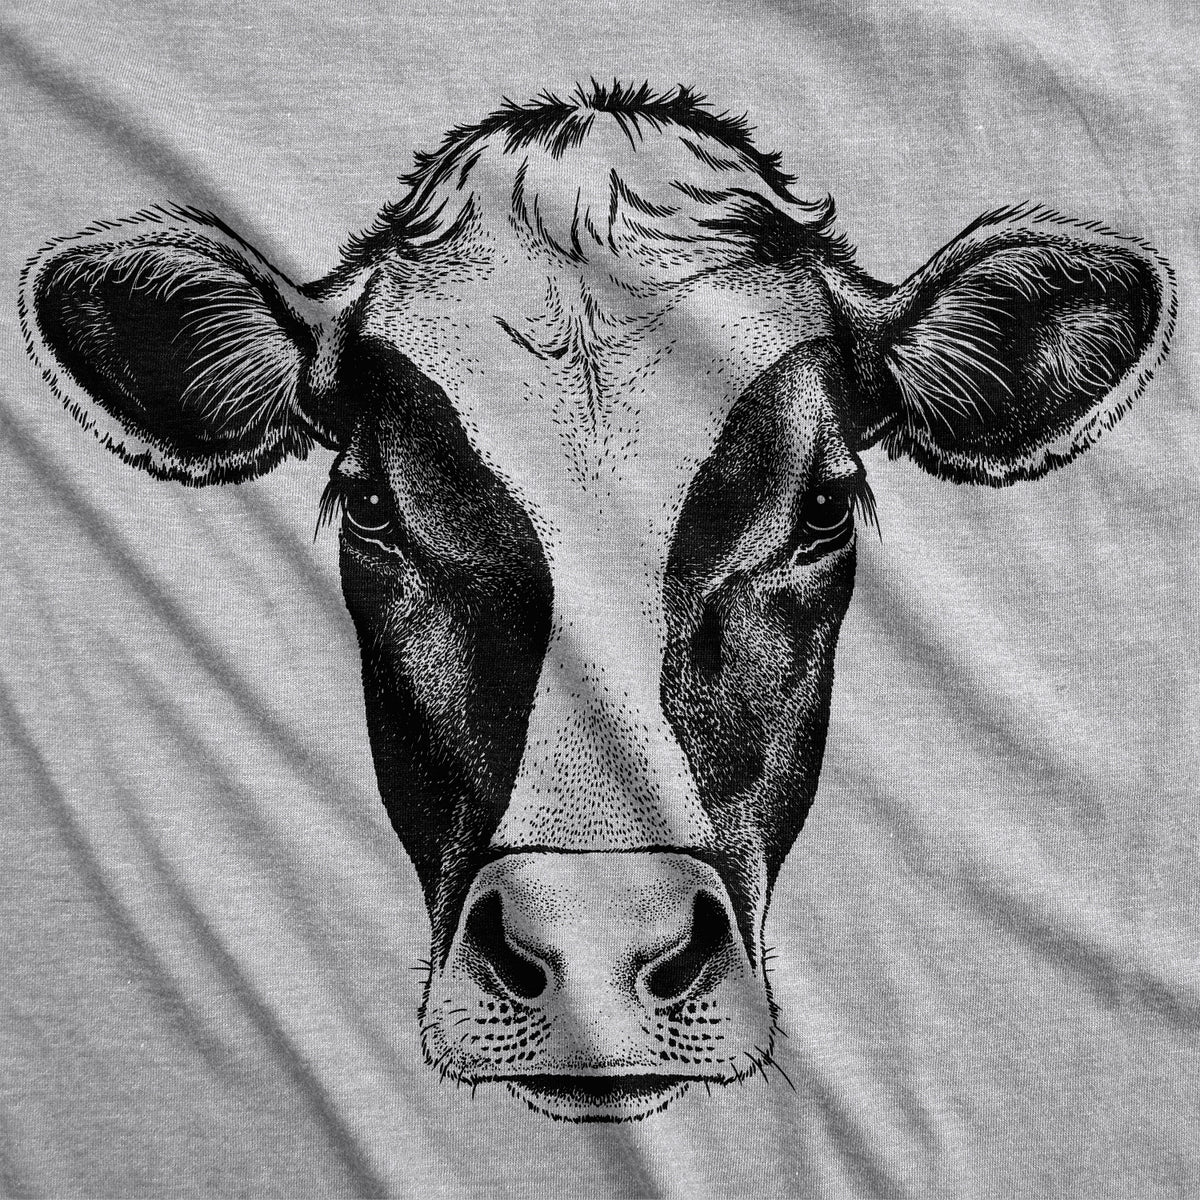 Ask Me About My Cow Women&#39;s T Shirt